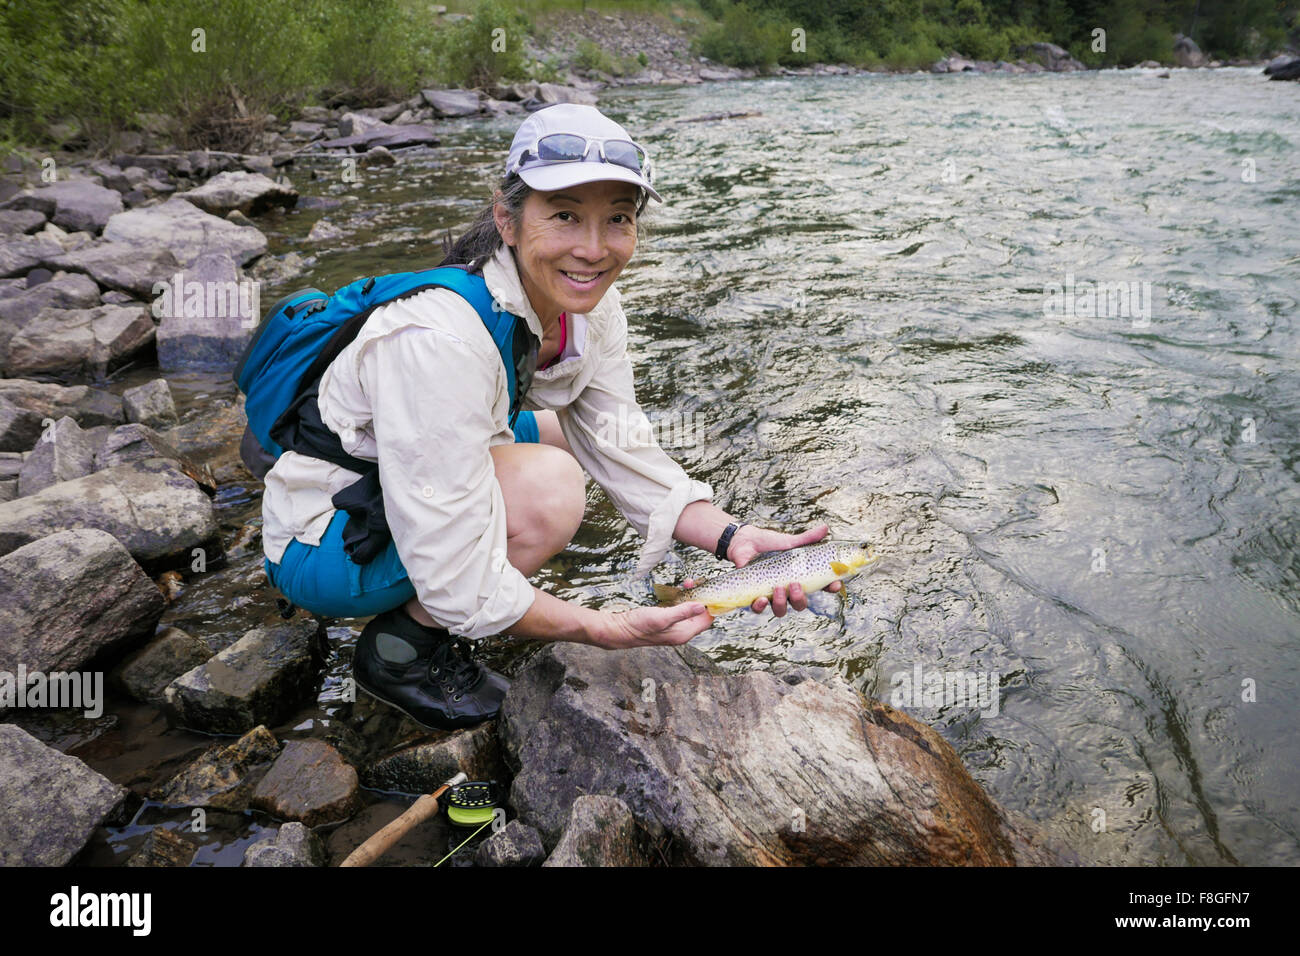 Japanese woman fishing in river Stock Photo